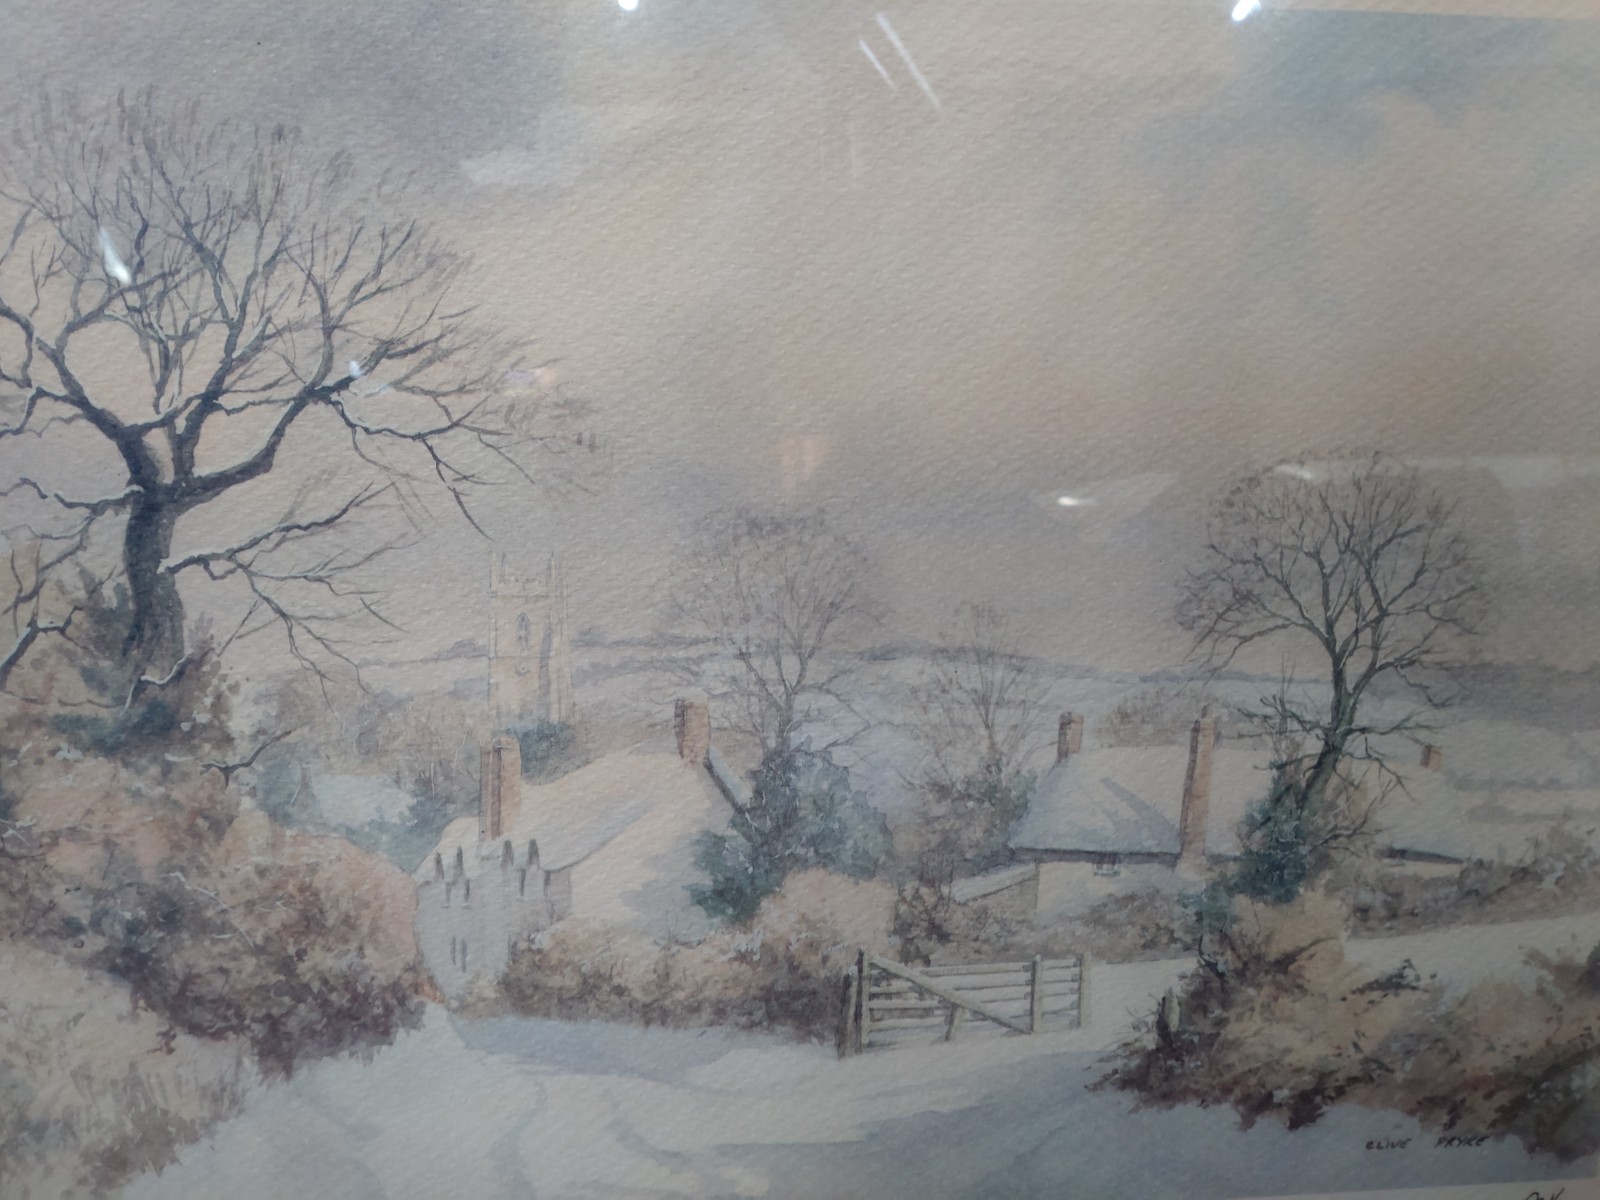 Clive Pryke (1948-2017) signed, limited edition print, No. 240/950. A Winter Scene. Fine Art stamp.